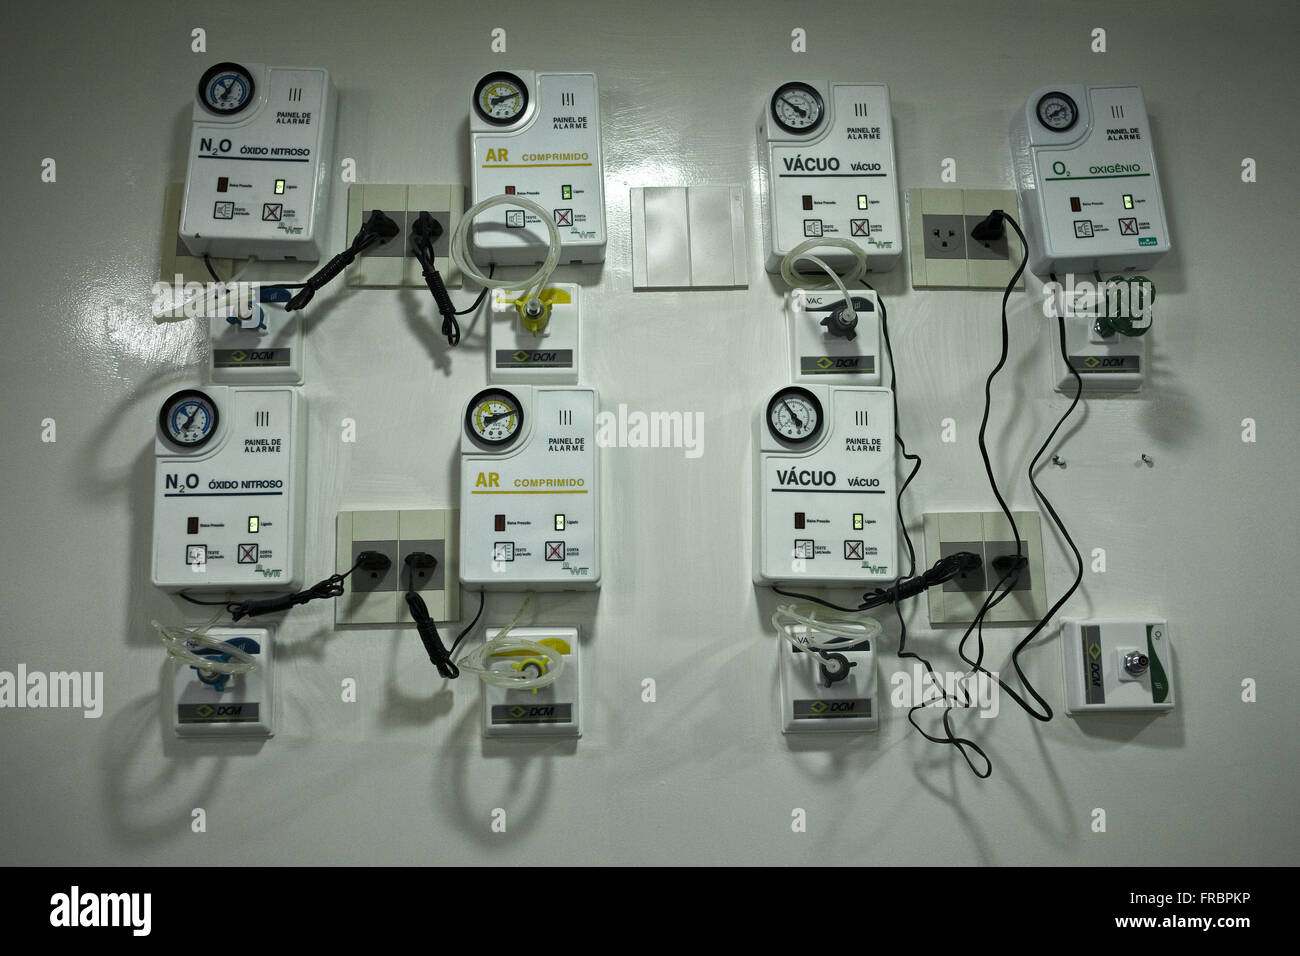 Alarm Panel - monitors piped medical gas networks Stock Photo